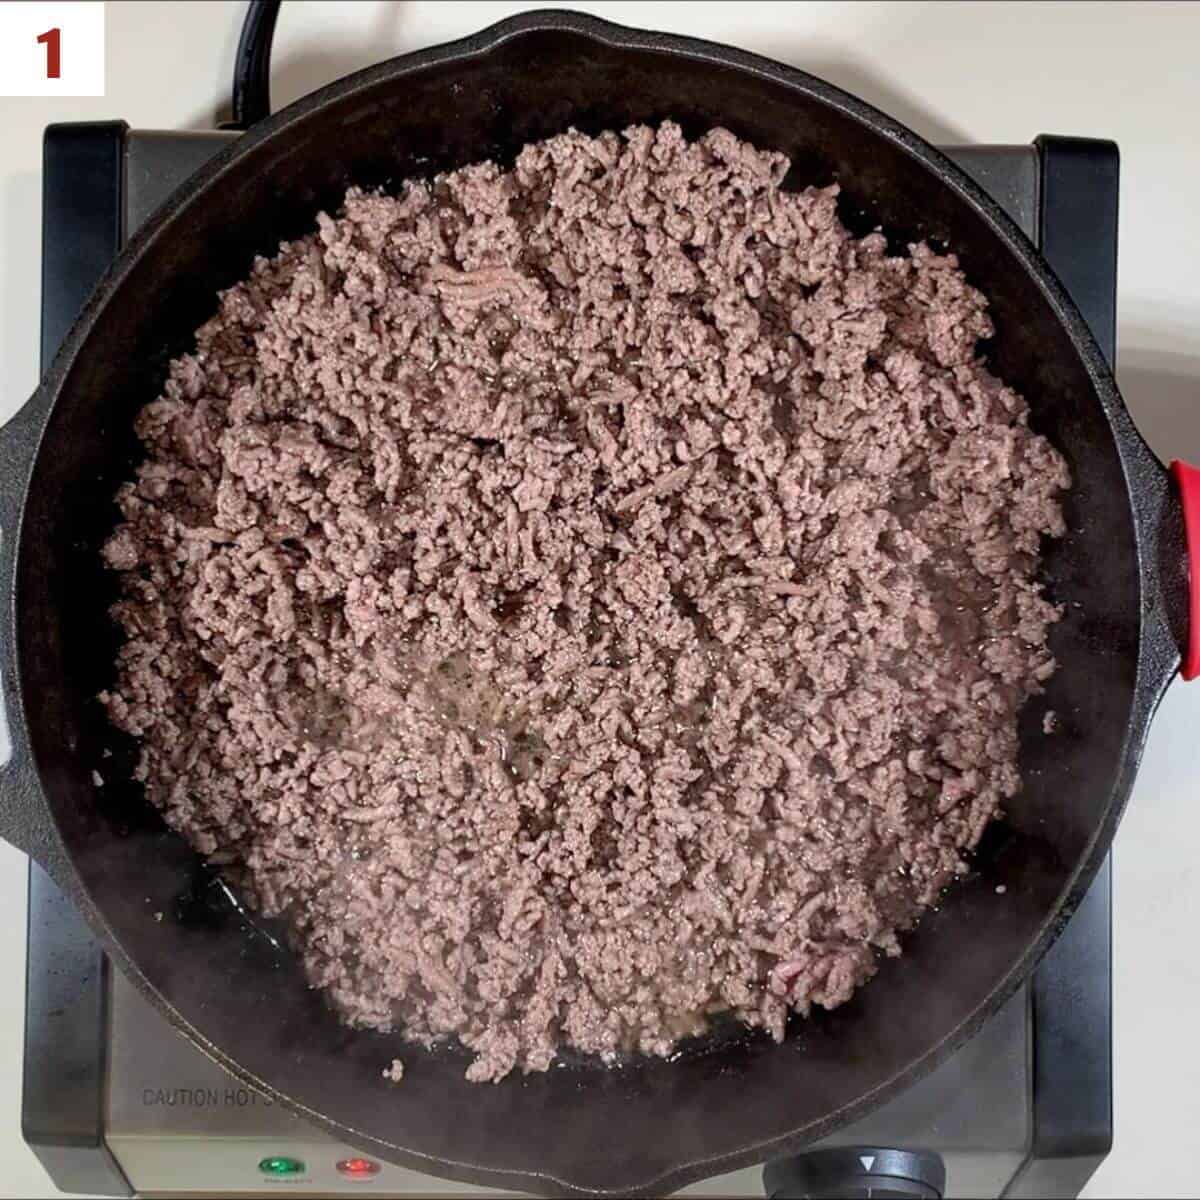 Browning ground beef for sloppy joe filling.